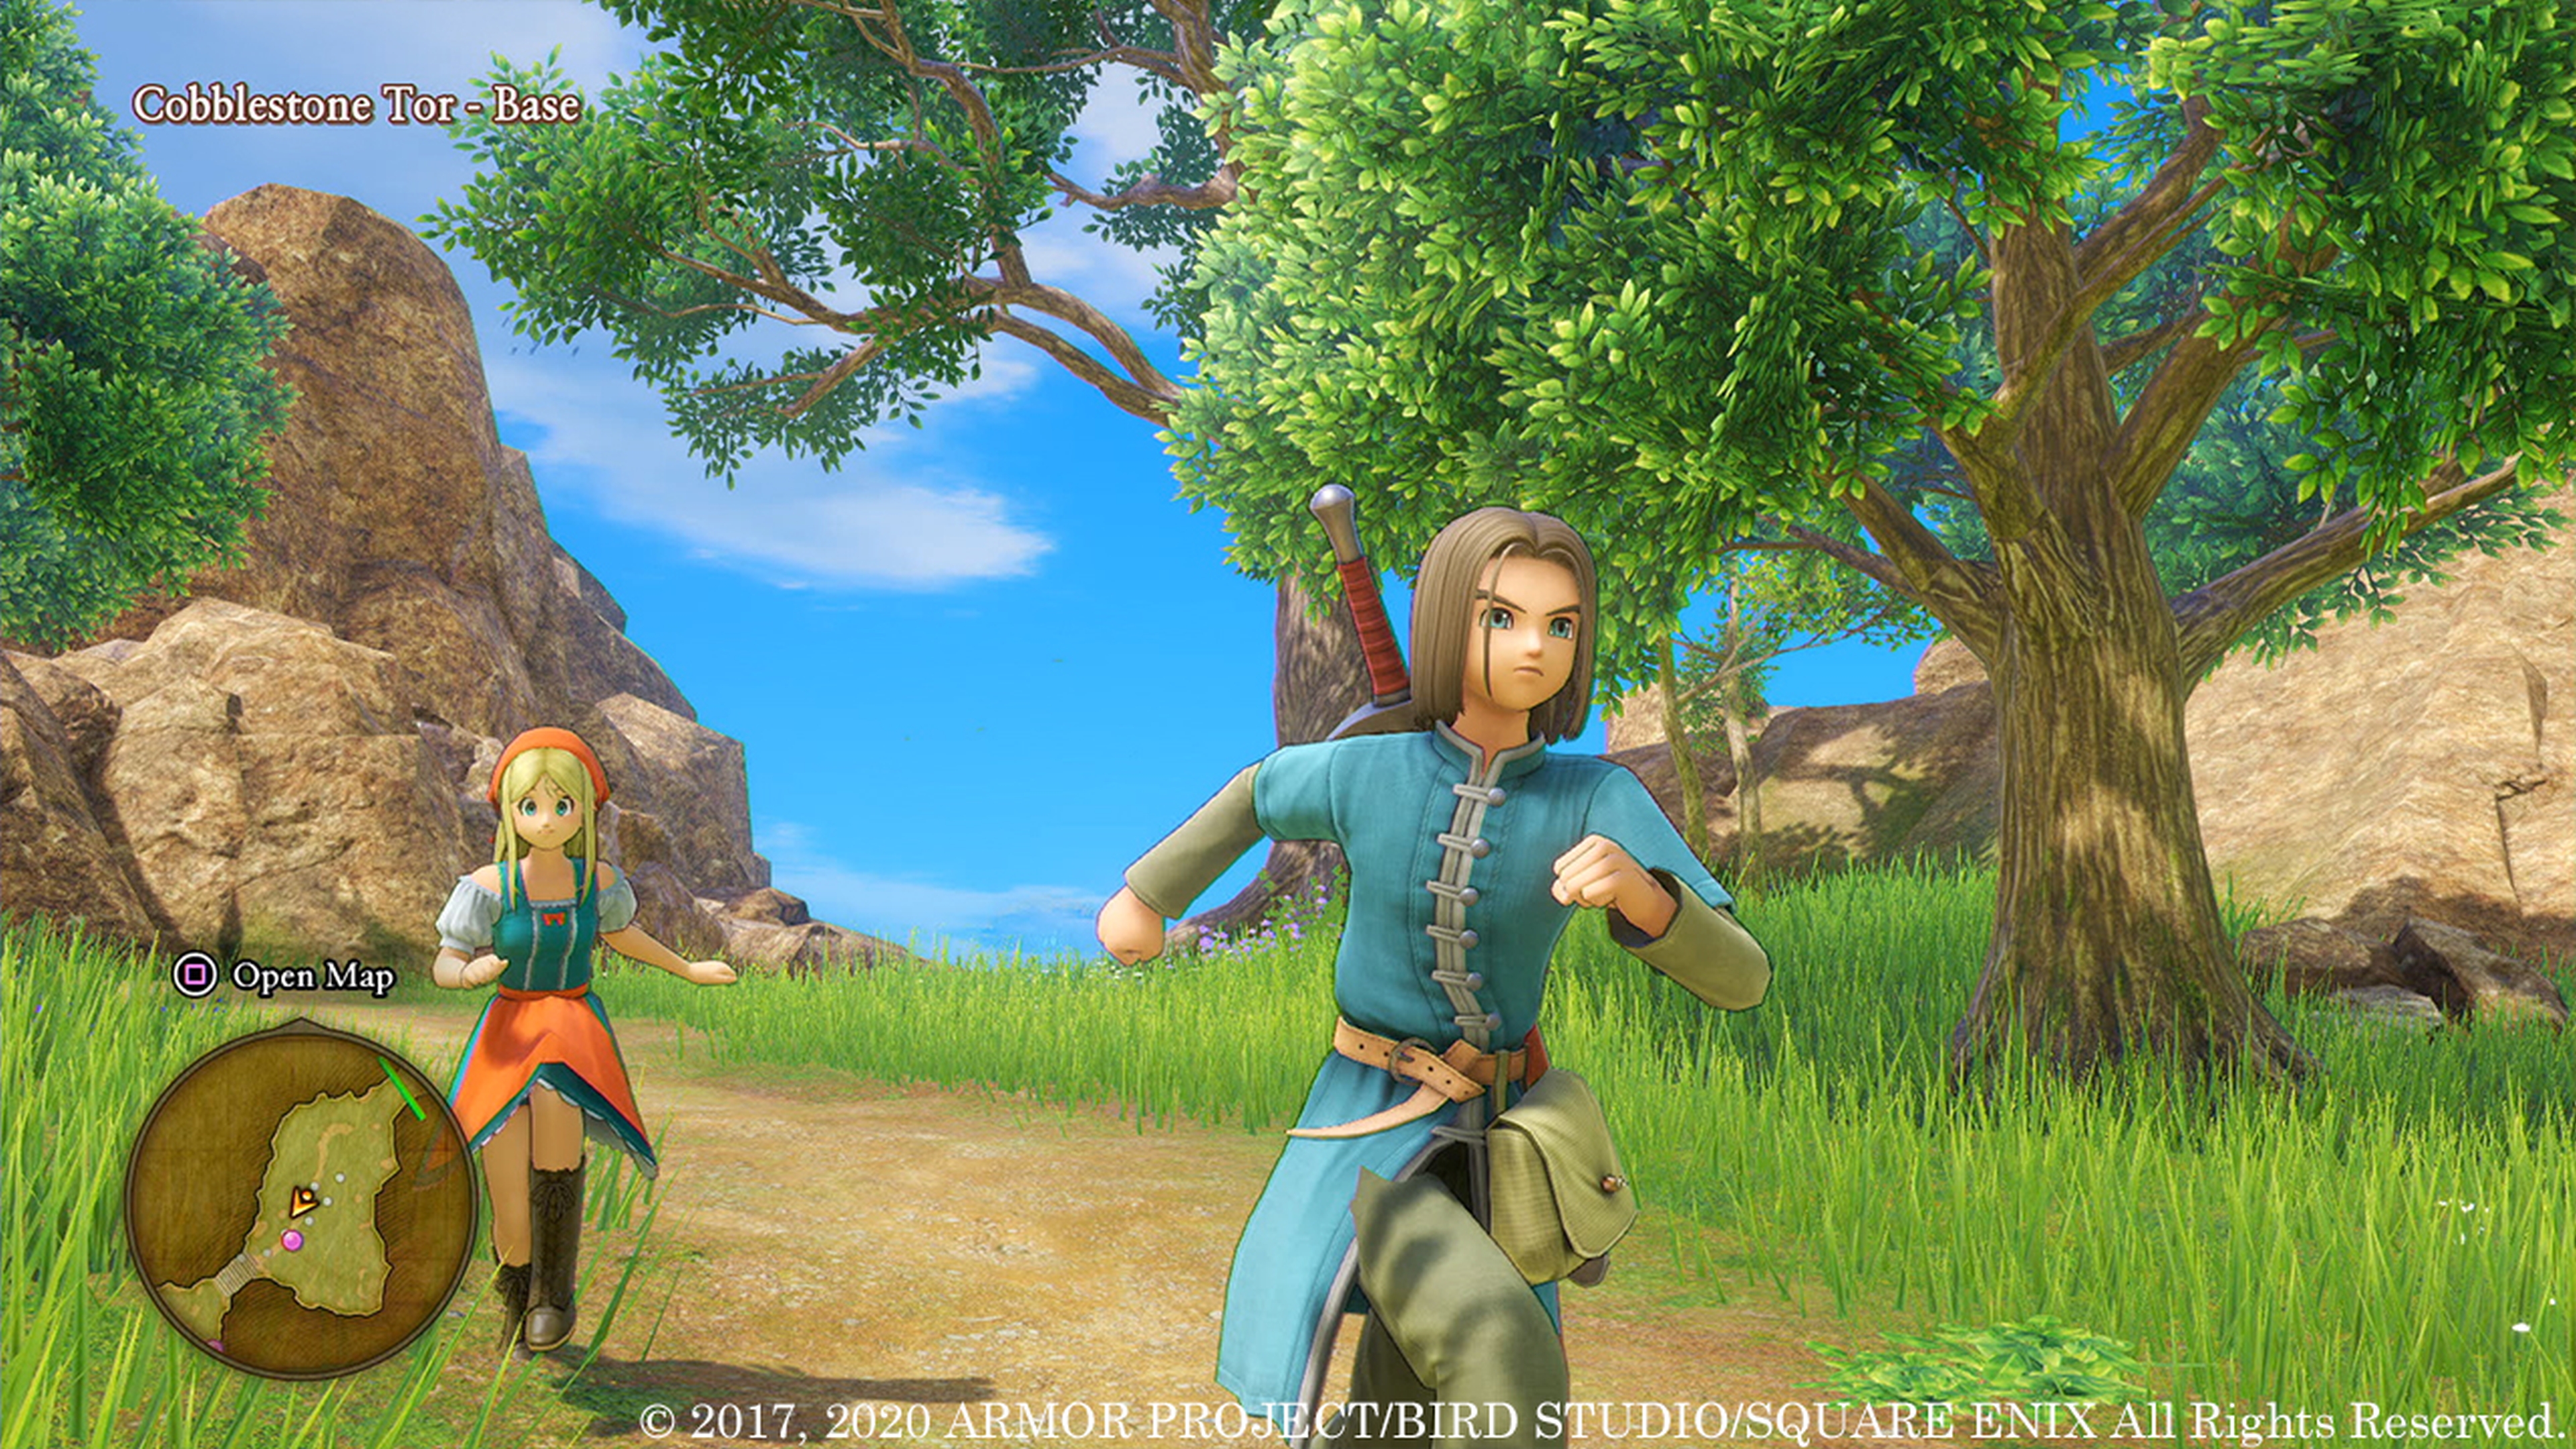 dragon quest xi s echoes of an elusive age